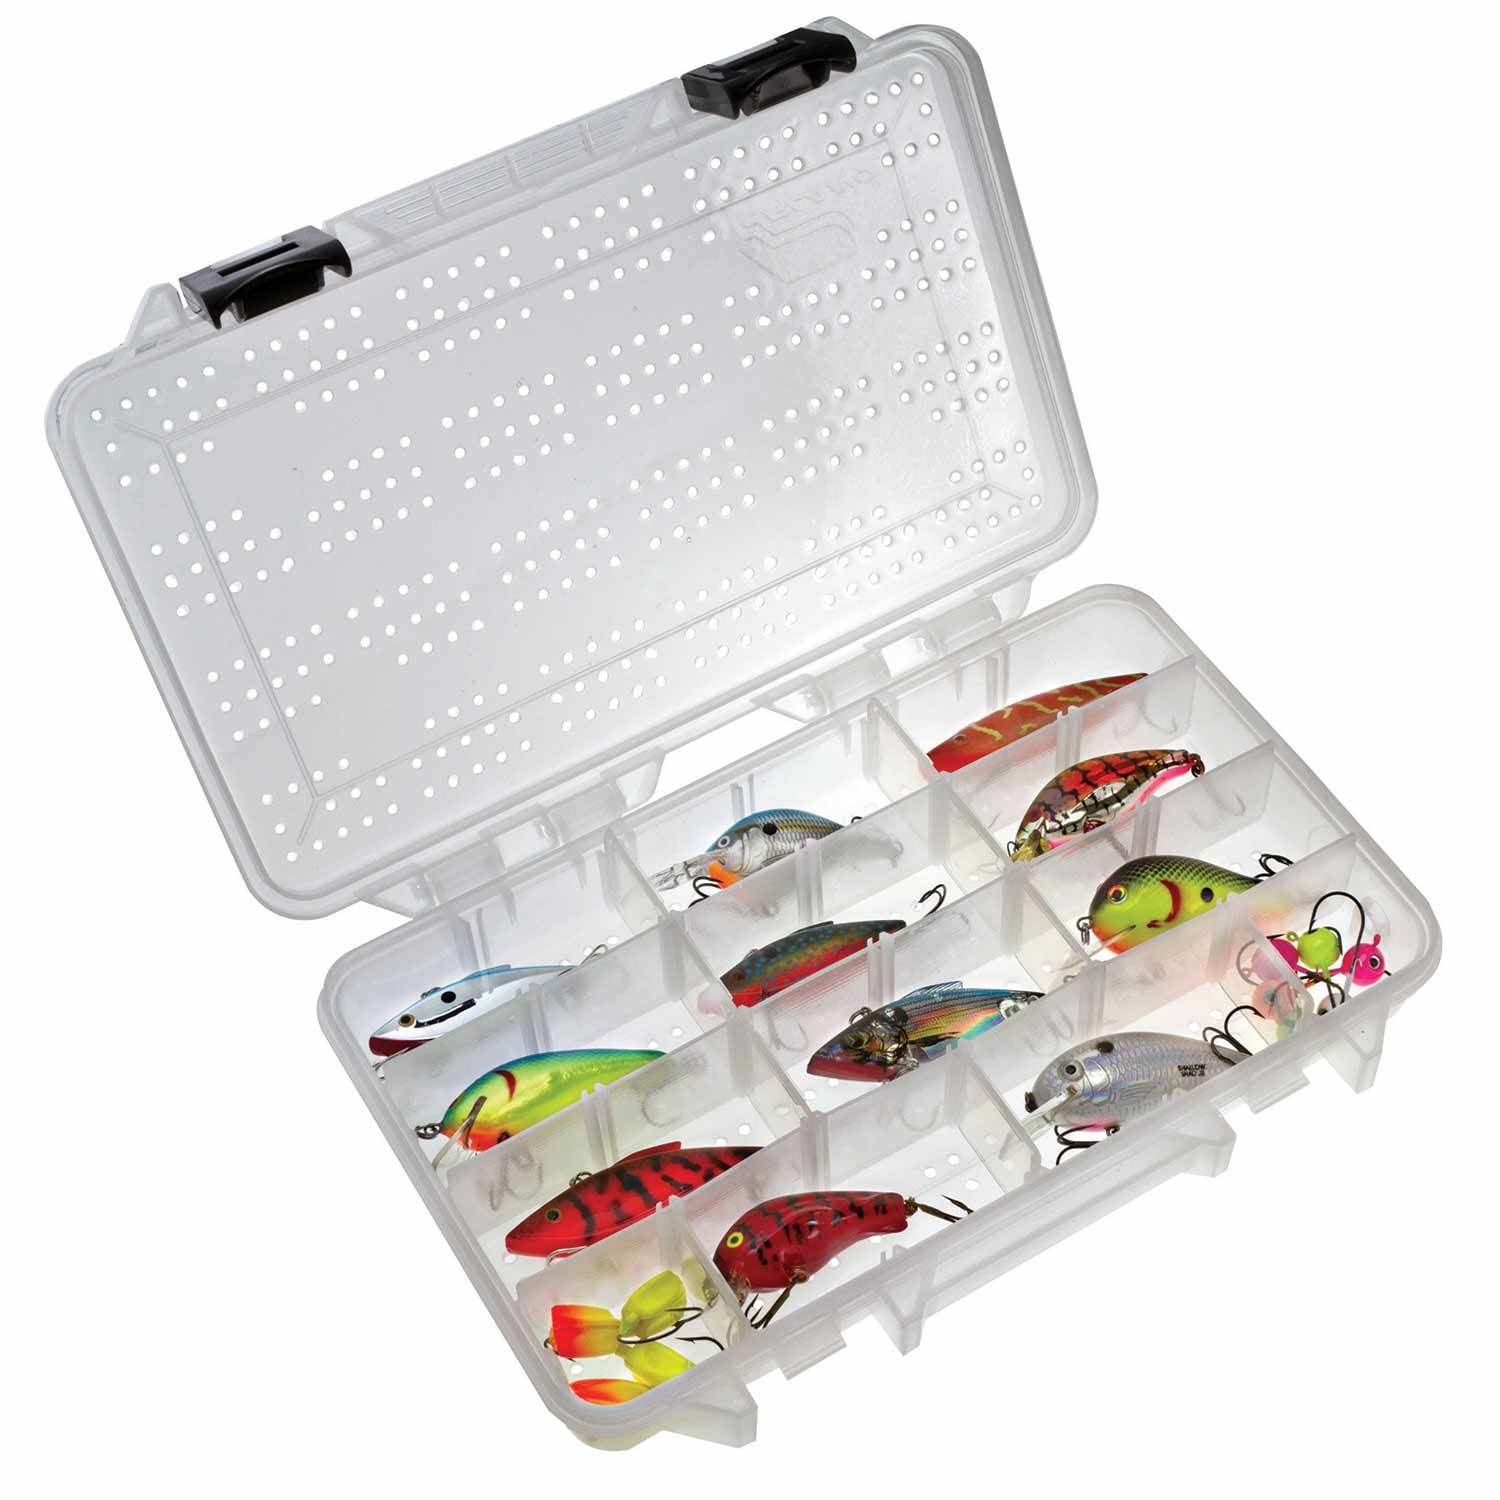 Fishing Tackle Box At the Best Price at Nootica - Nootica - Water